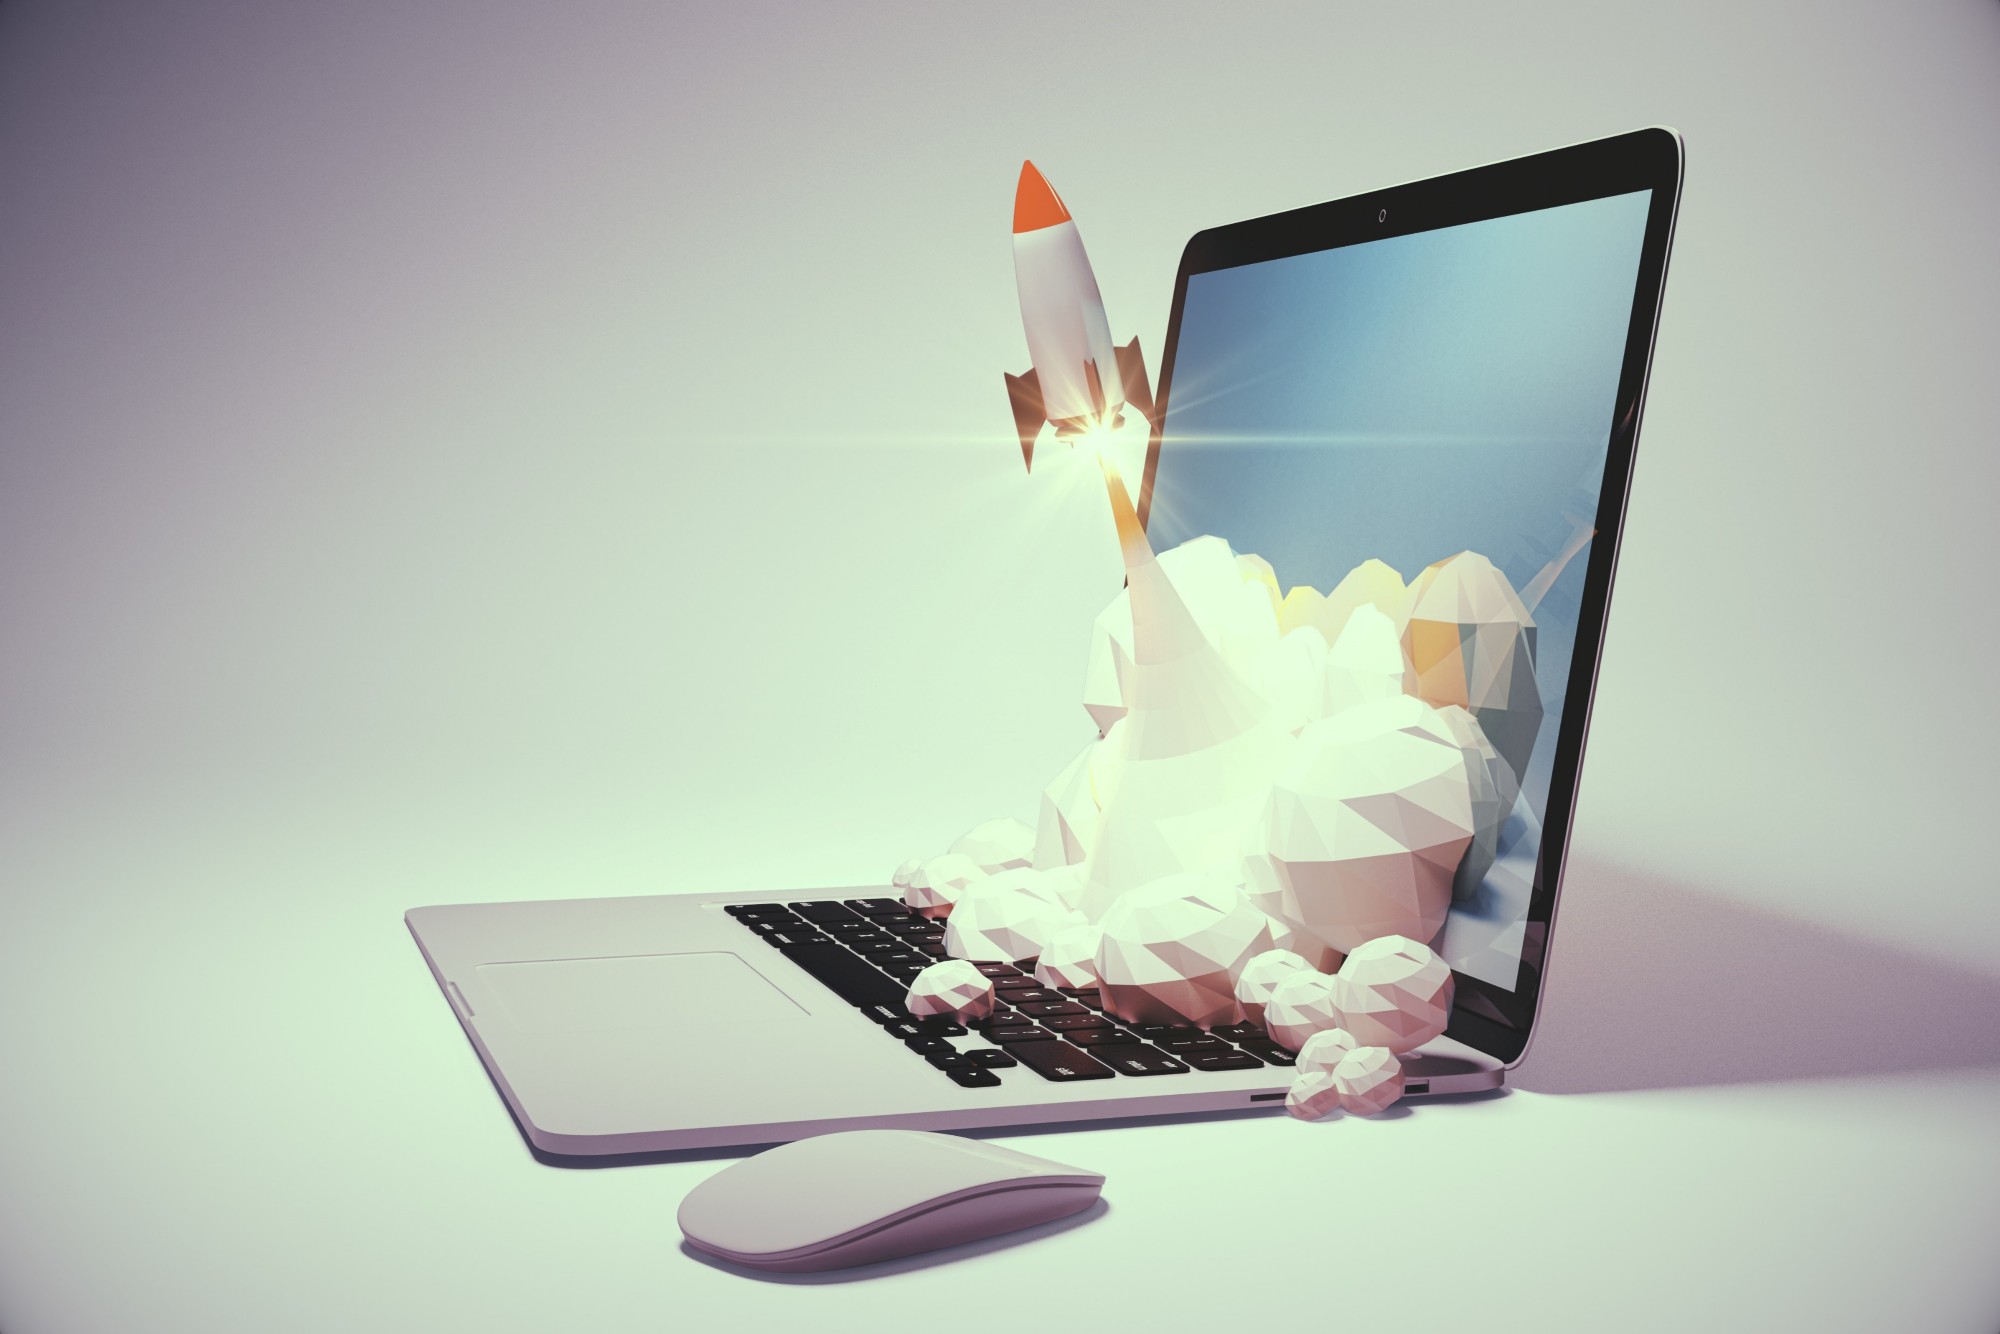 graphic of a space rocket taking off from a laptop screen